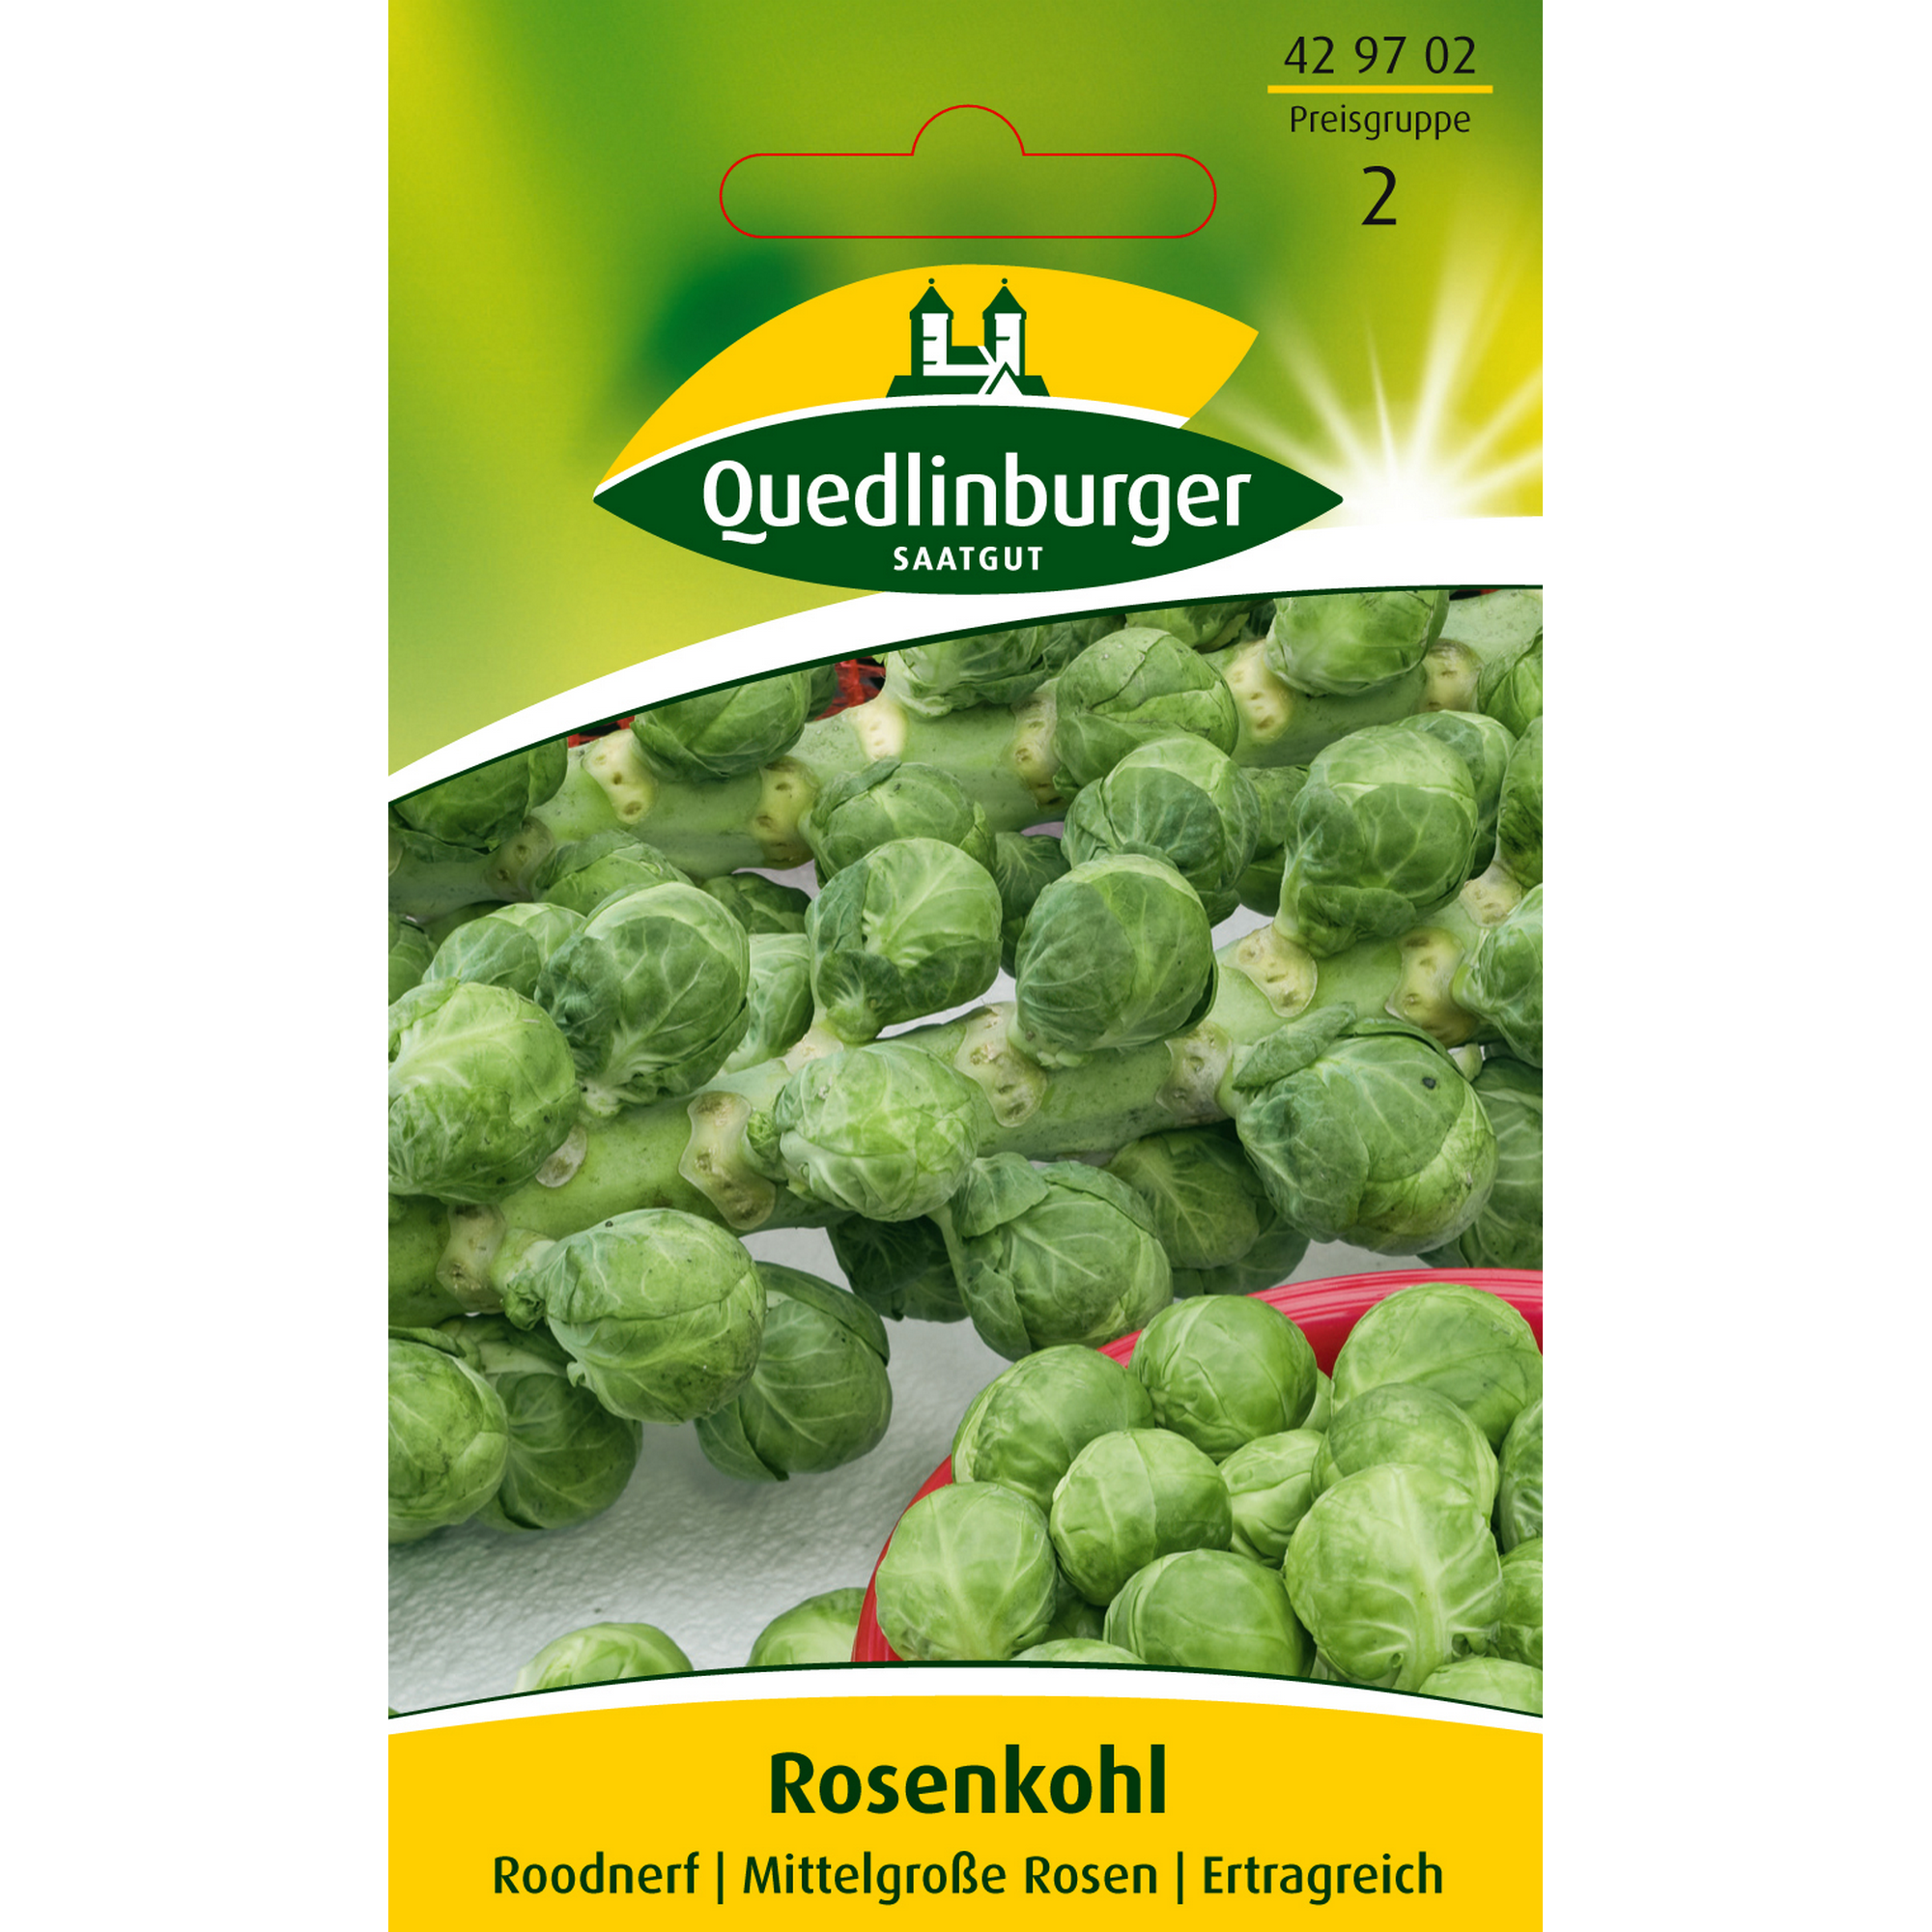 Rosenkohl 'Roodnerf' + product picture